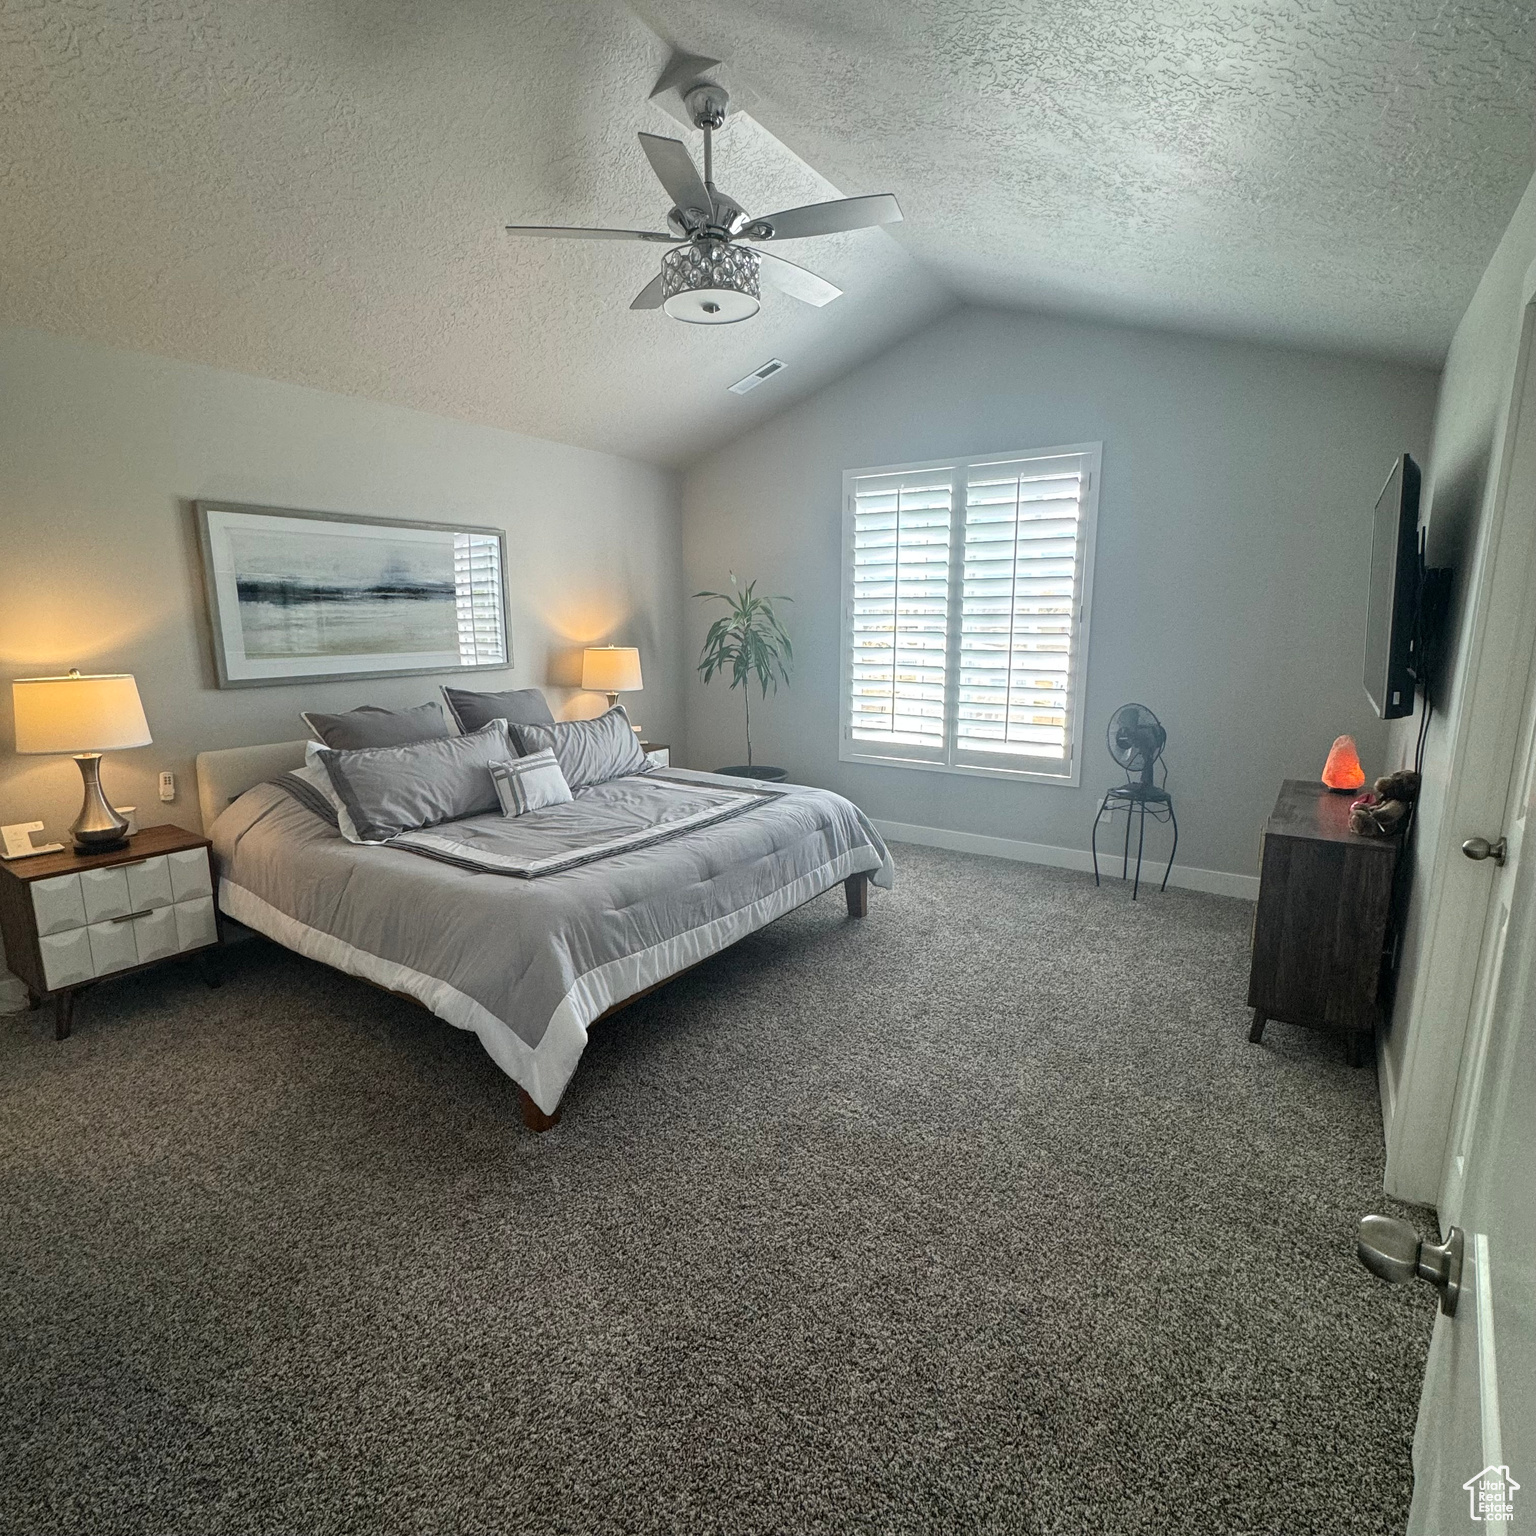 Bedroom featuring a textured ceiling, vaulted ceiling, ceiling fan, and dark colored carpet